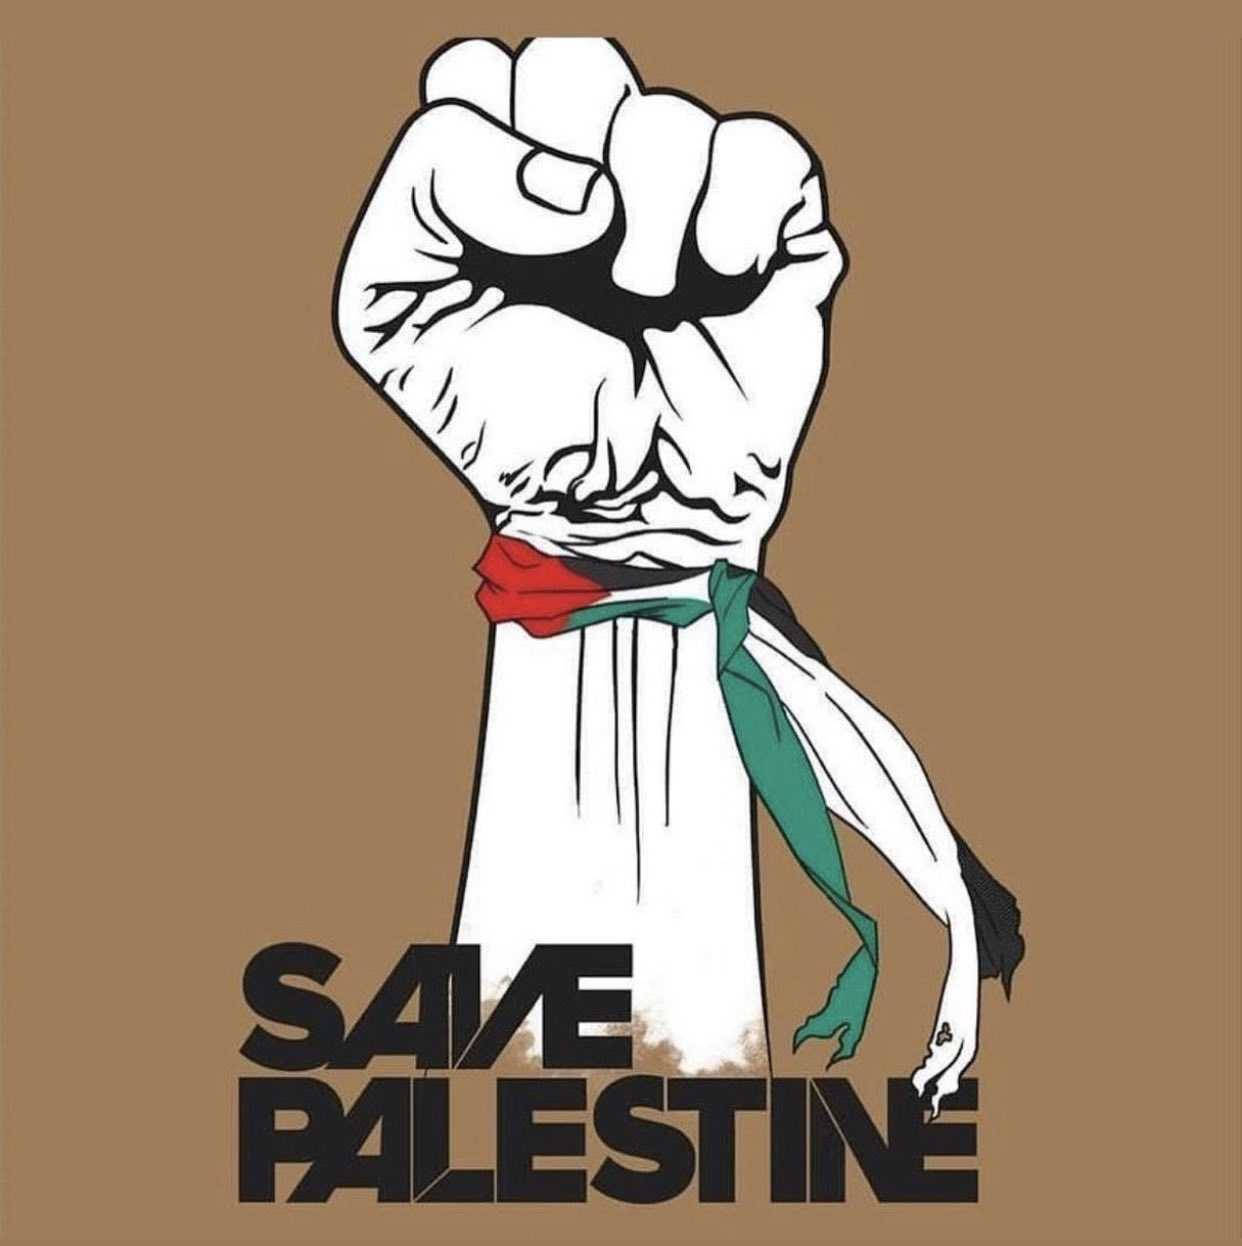 A Powerful Call to Action - Save Palestine Digitally Rendered Art Wallpaper